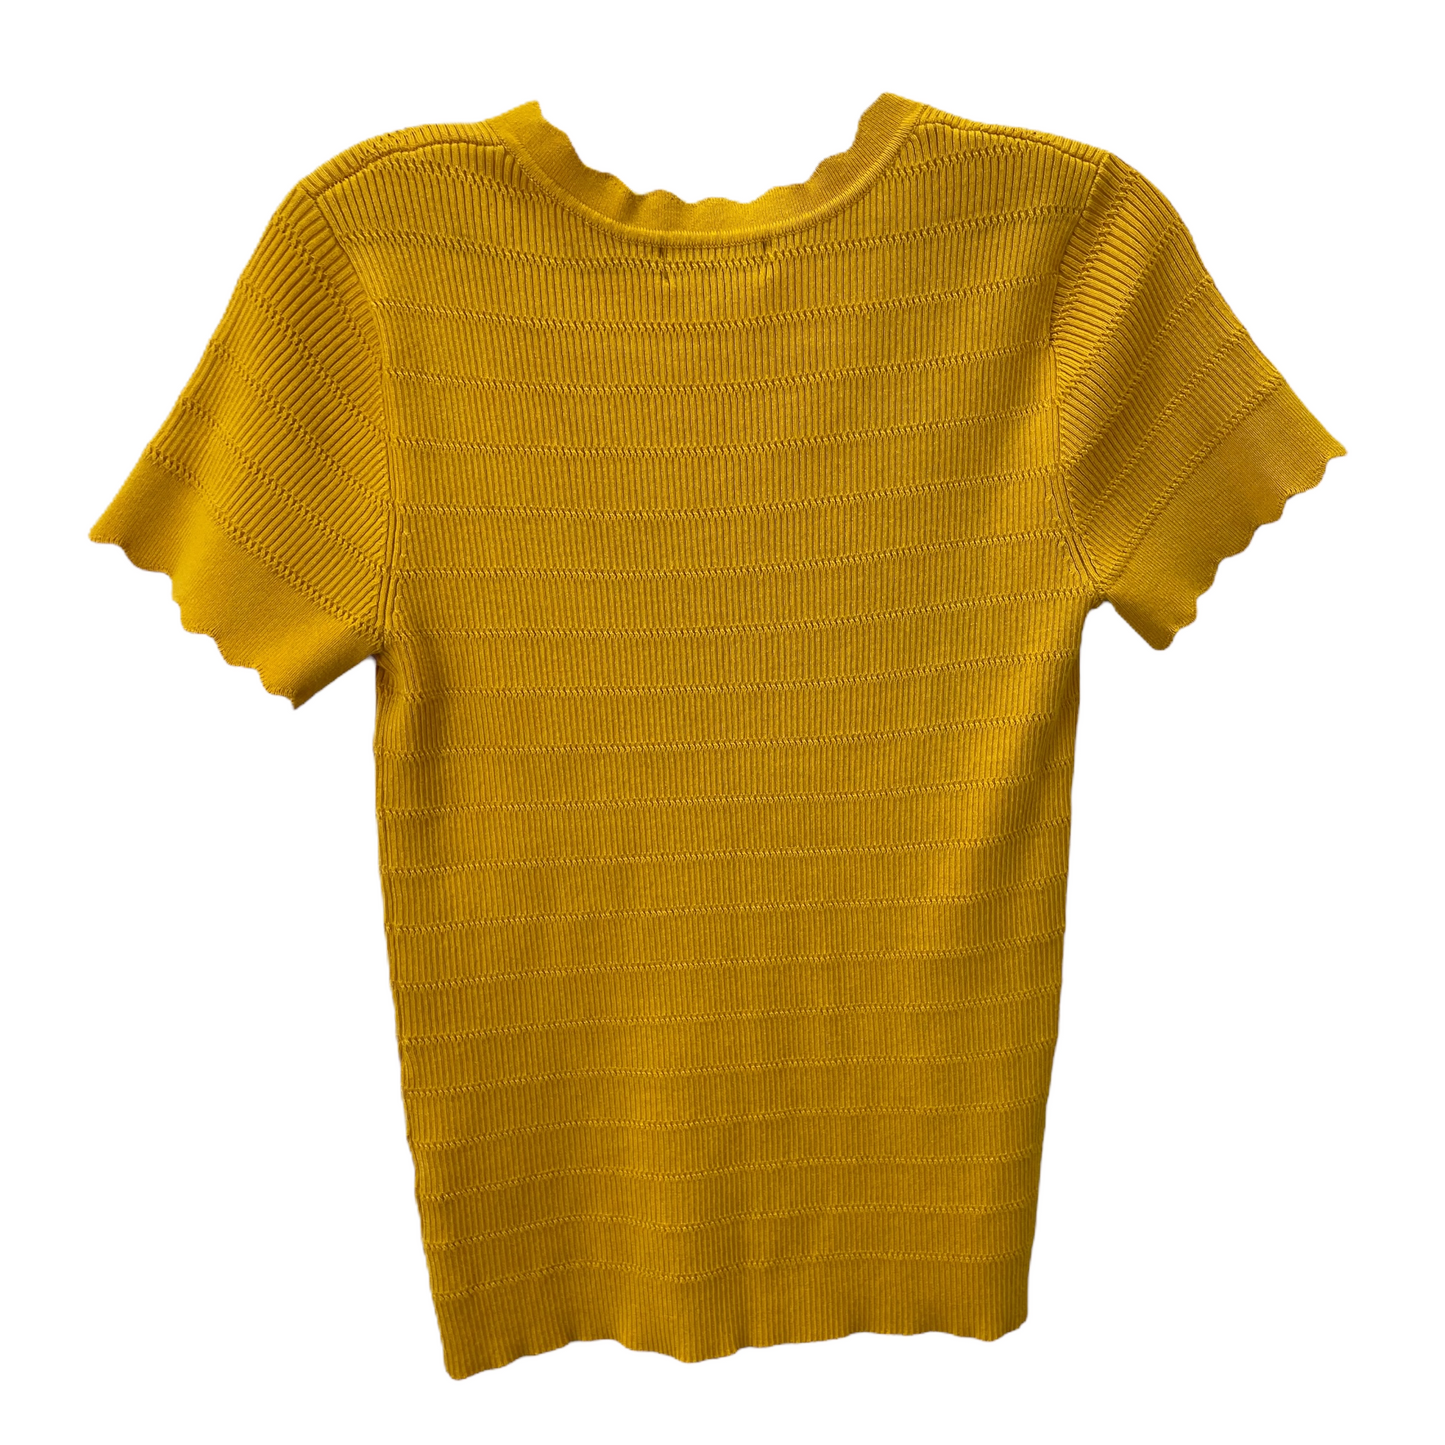 Yellow Top Short Sleeve By Karl Lagerfeld, Size: M